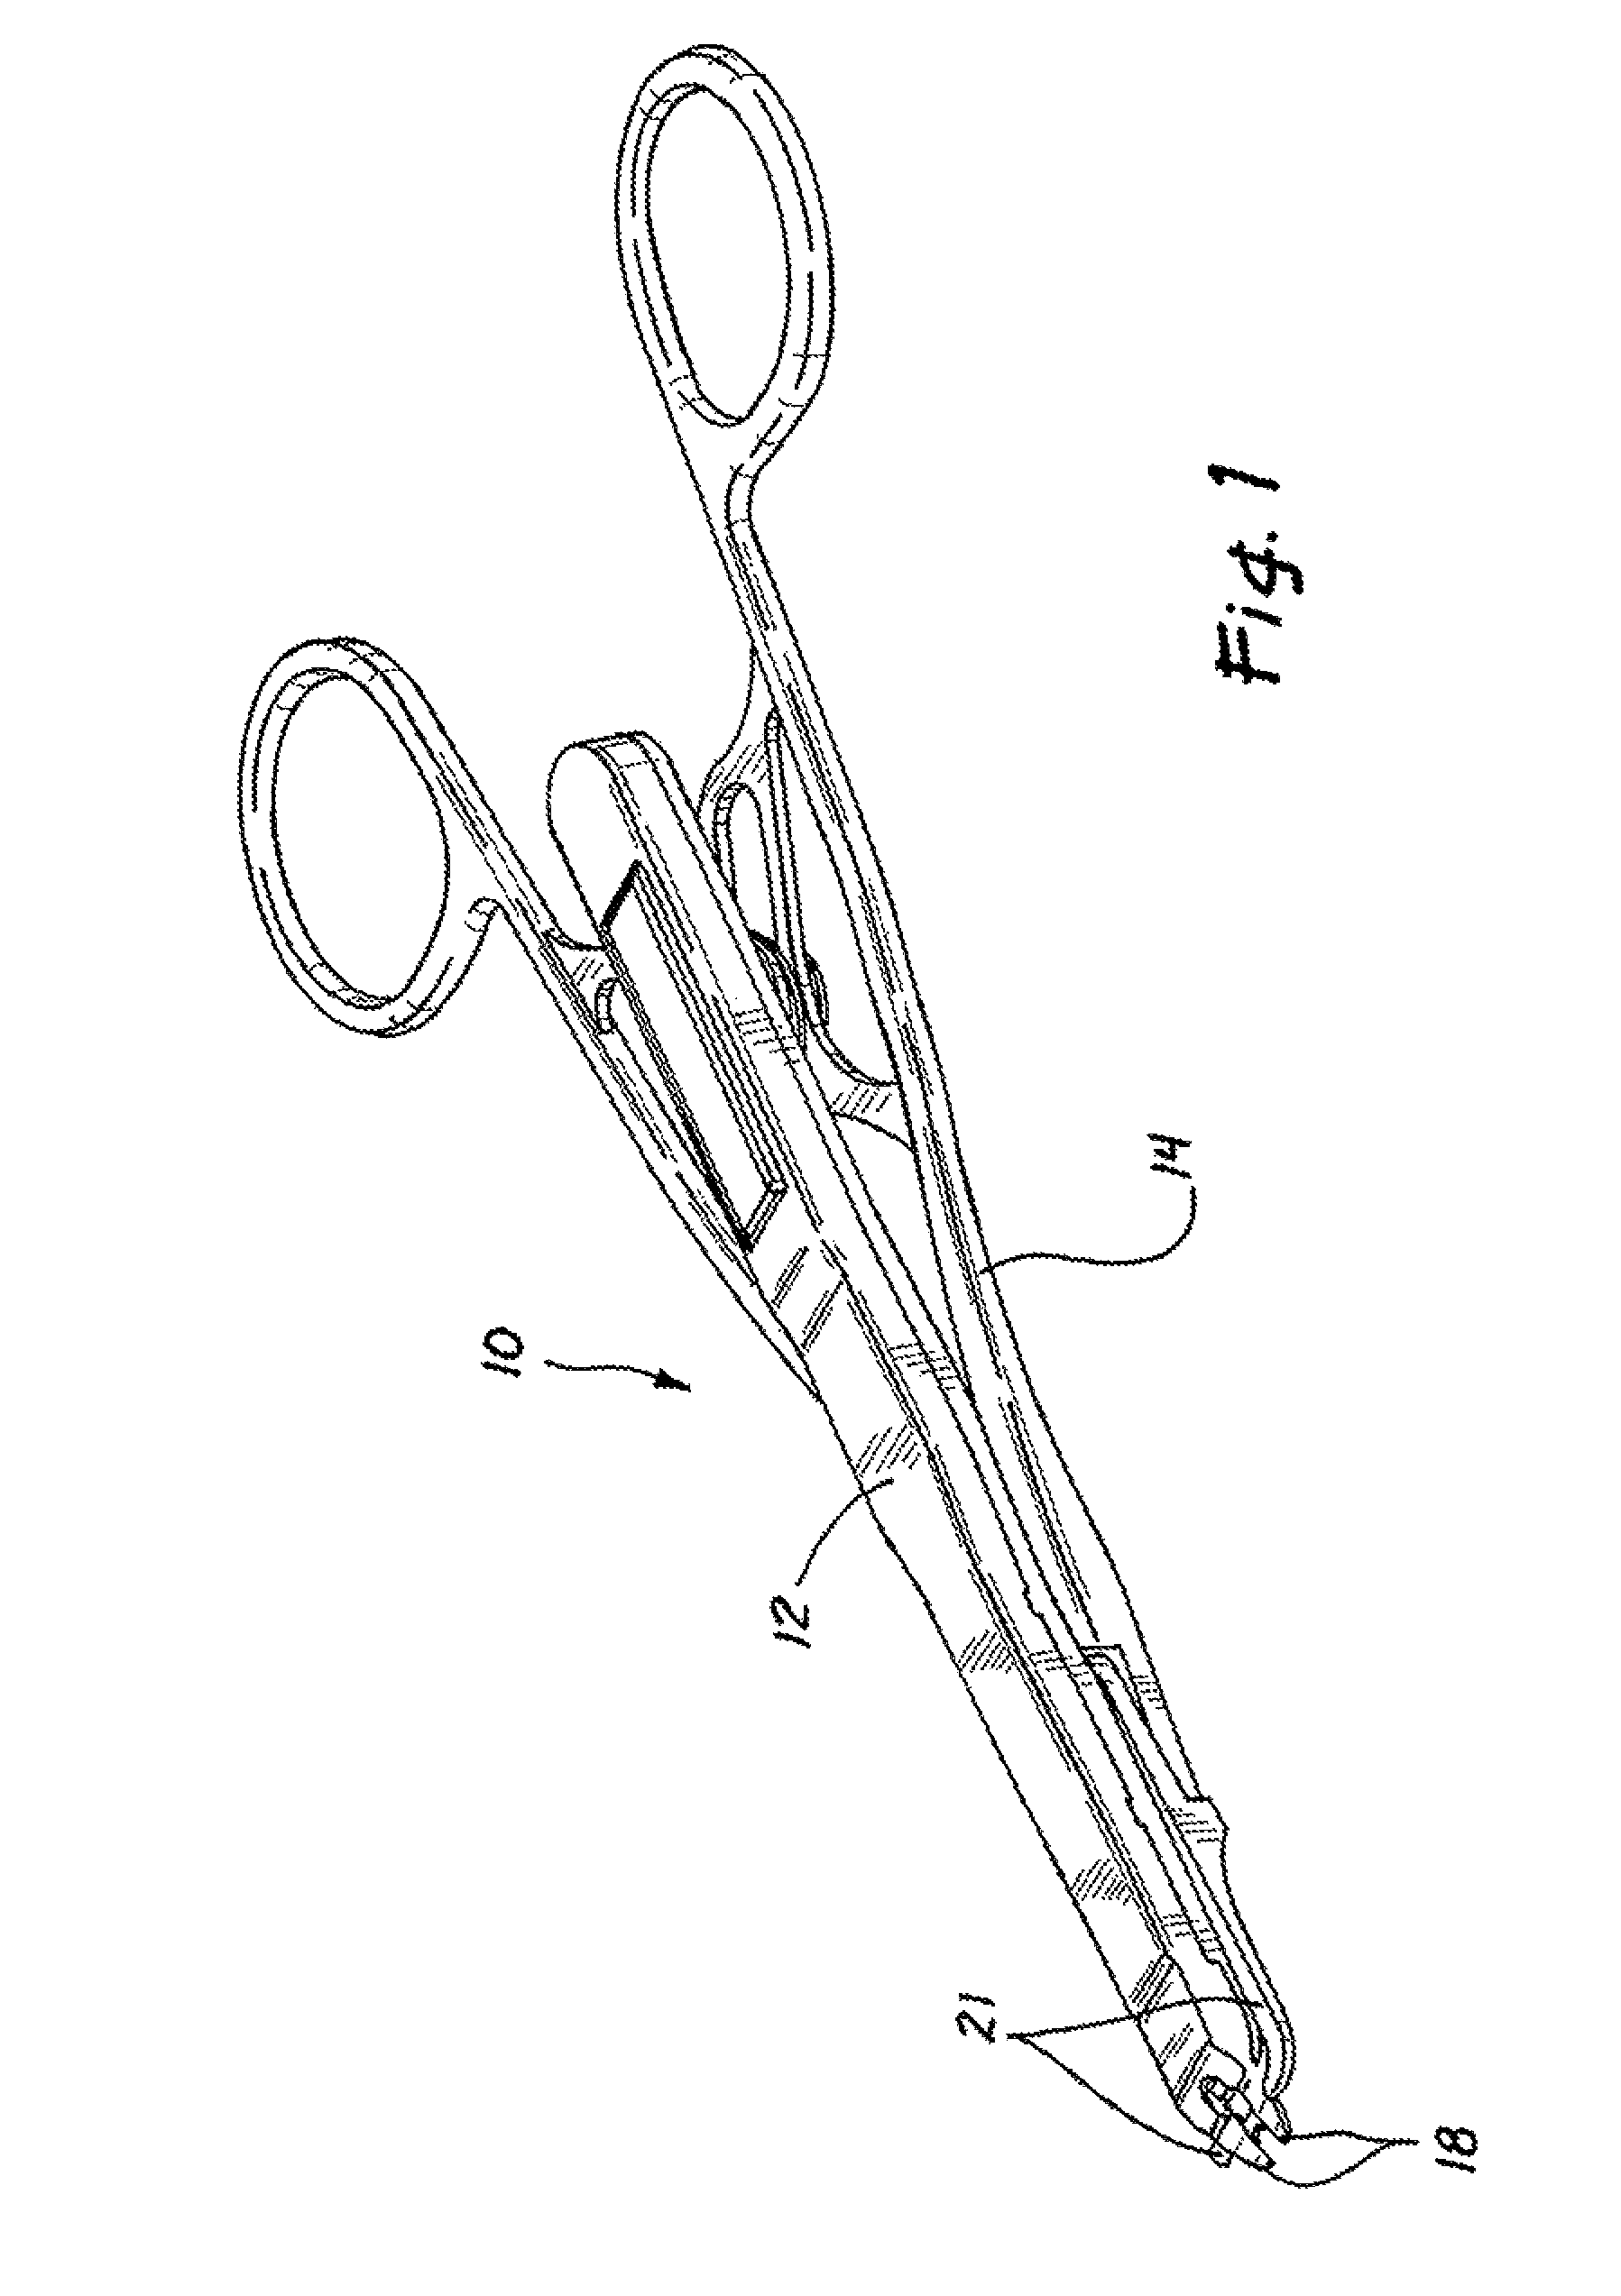 Multiple clip applier apparatus and method